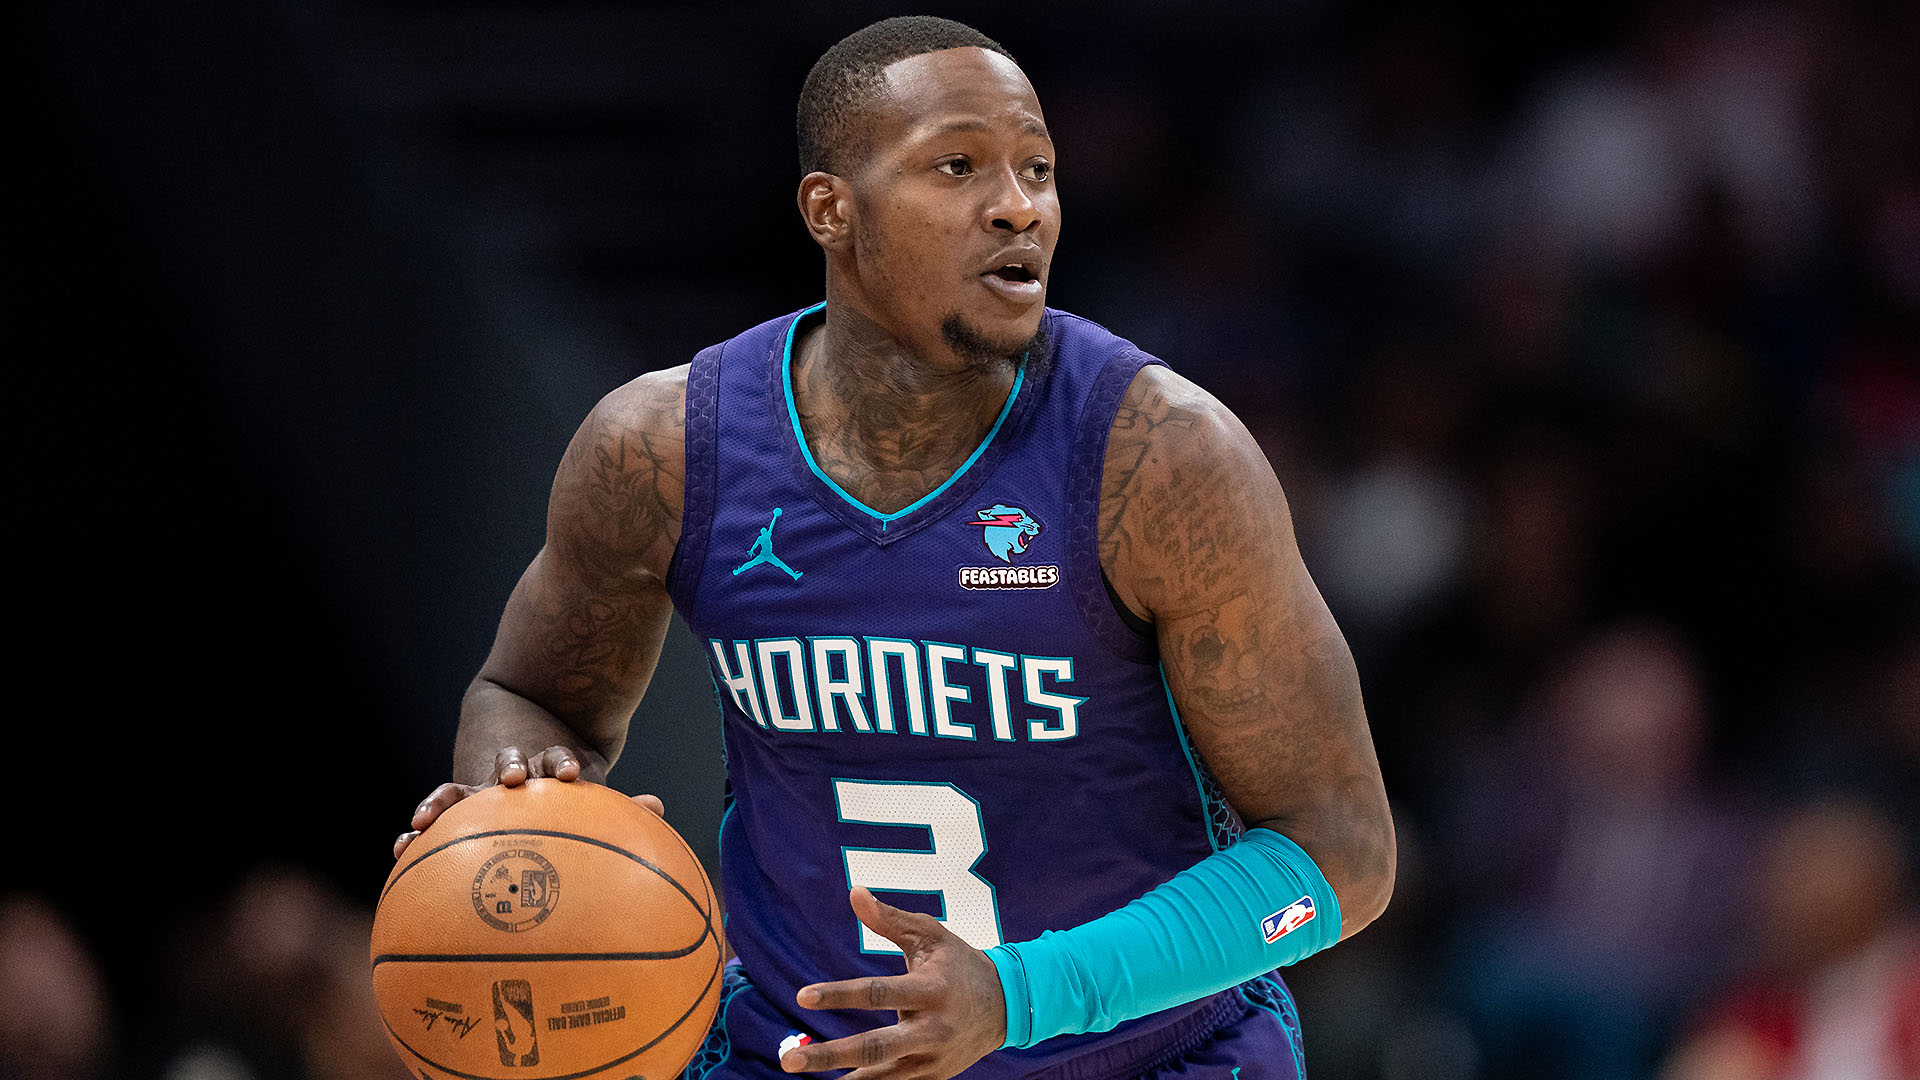 BREAKING: Heat have acquired stud Terry Rozier for Kyle Lowry